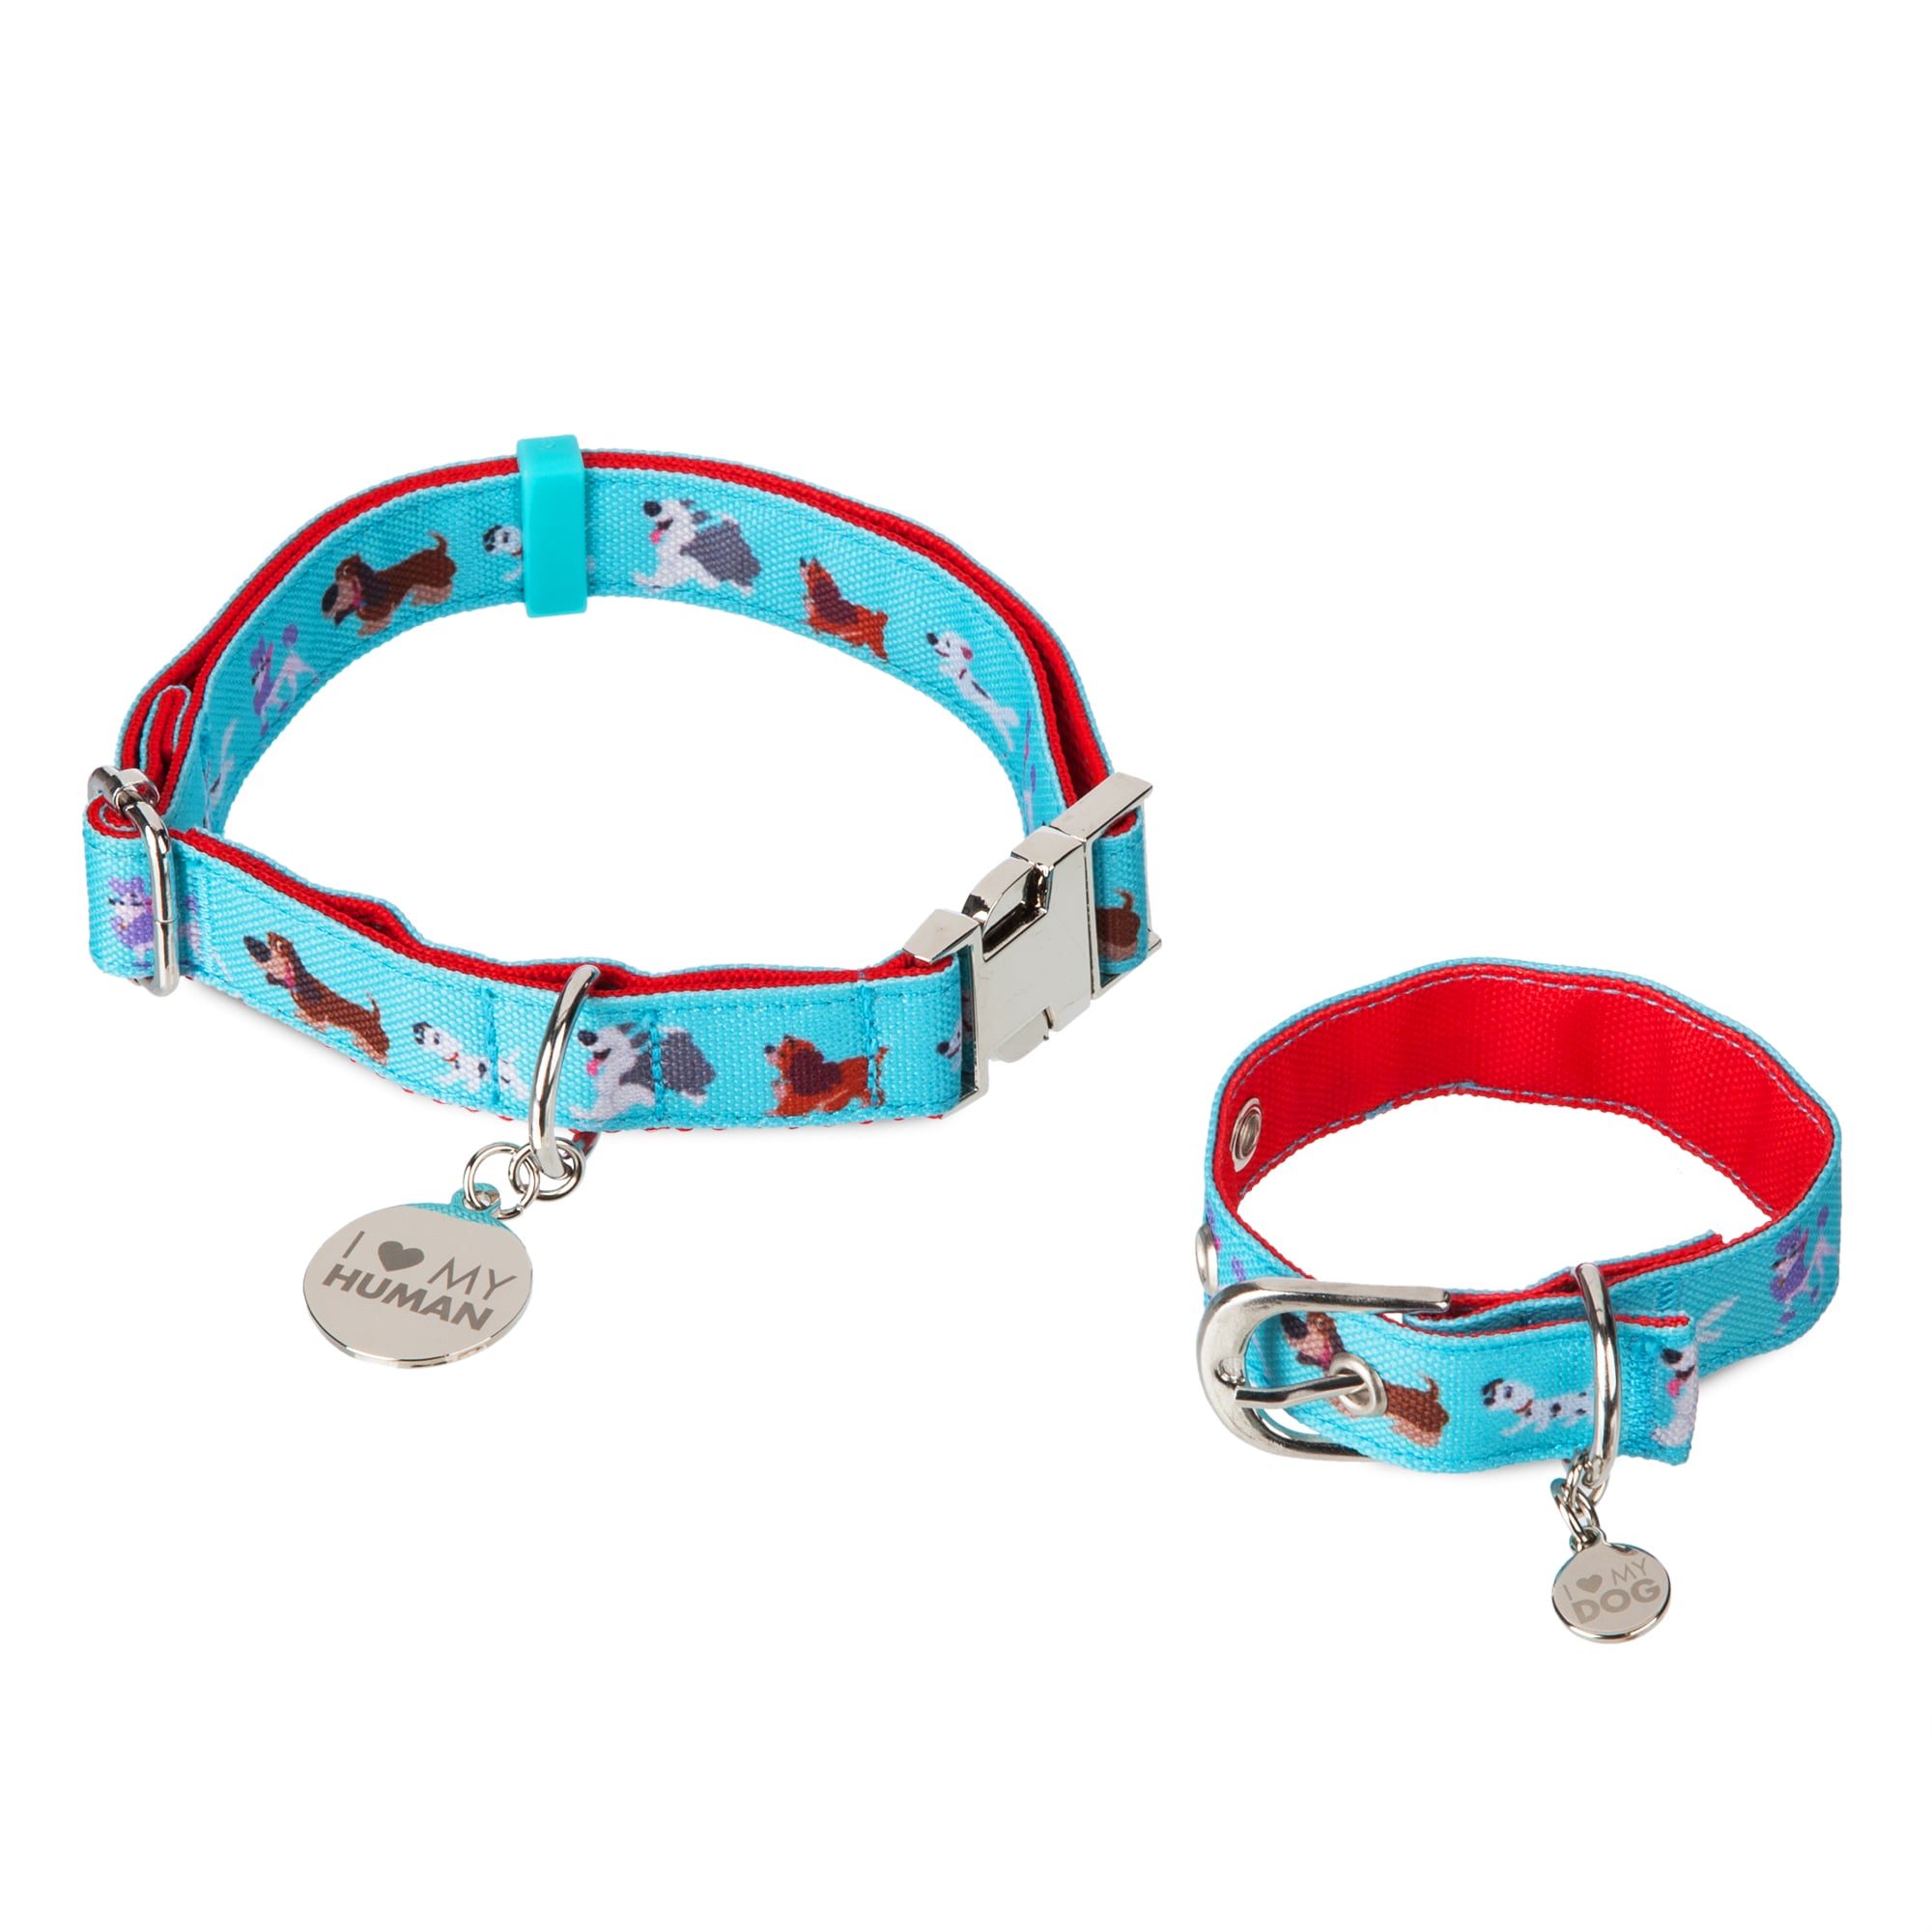 dog and owner matching collar and bracelet